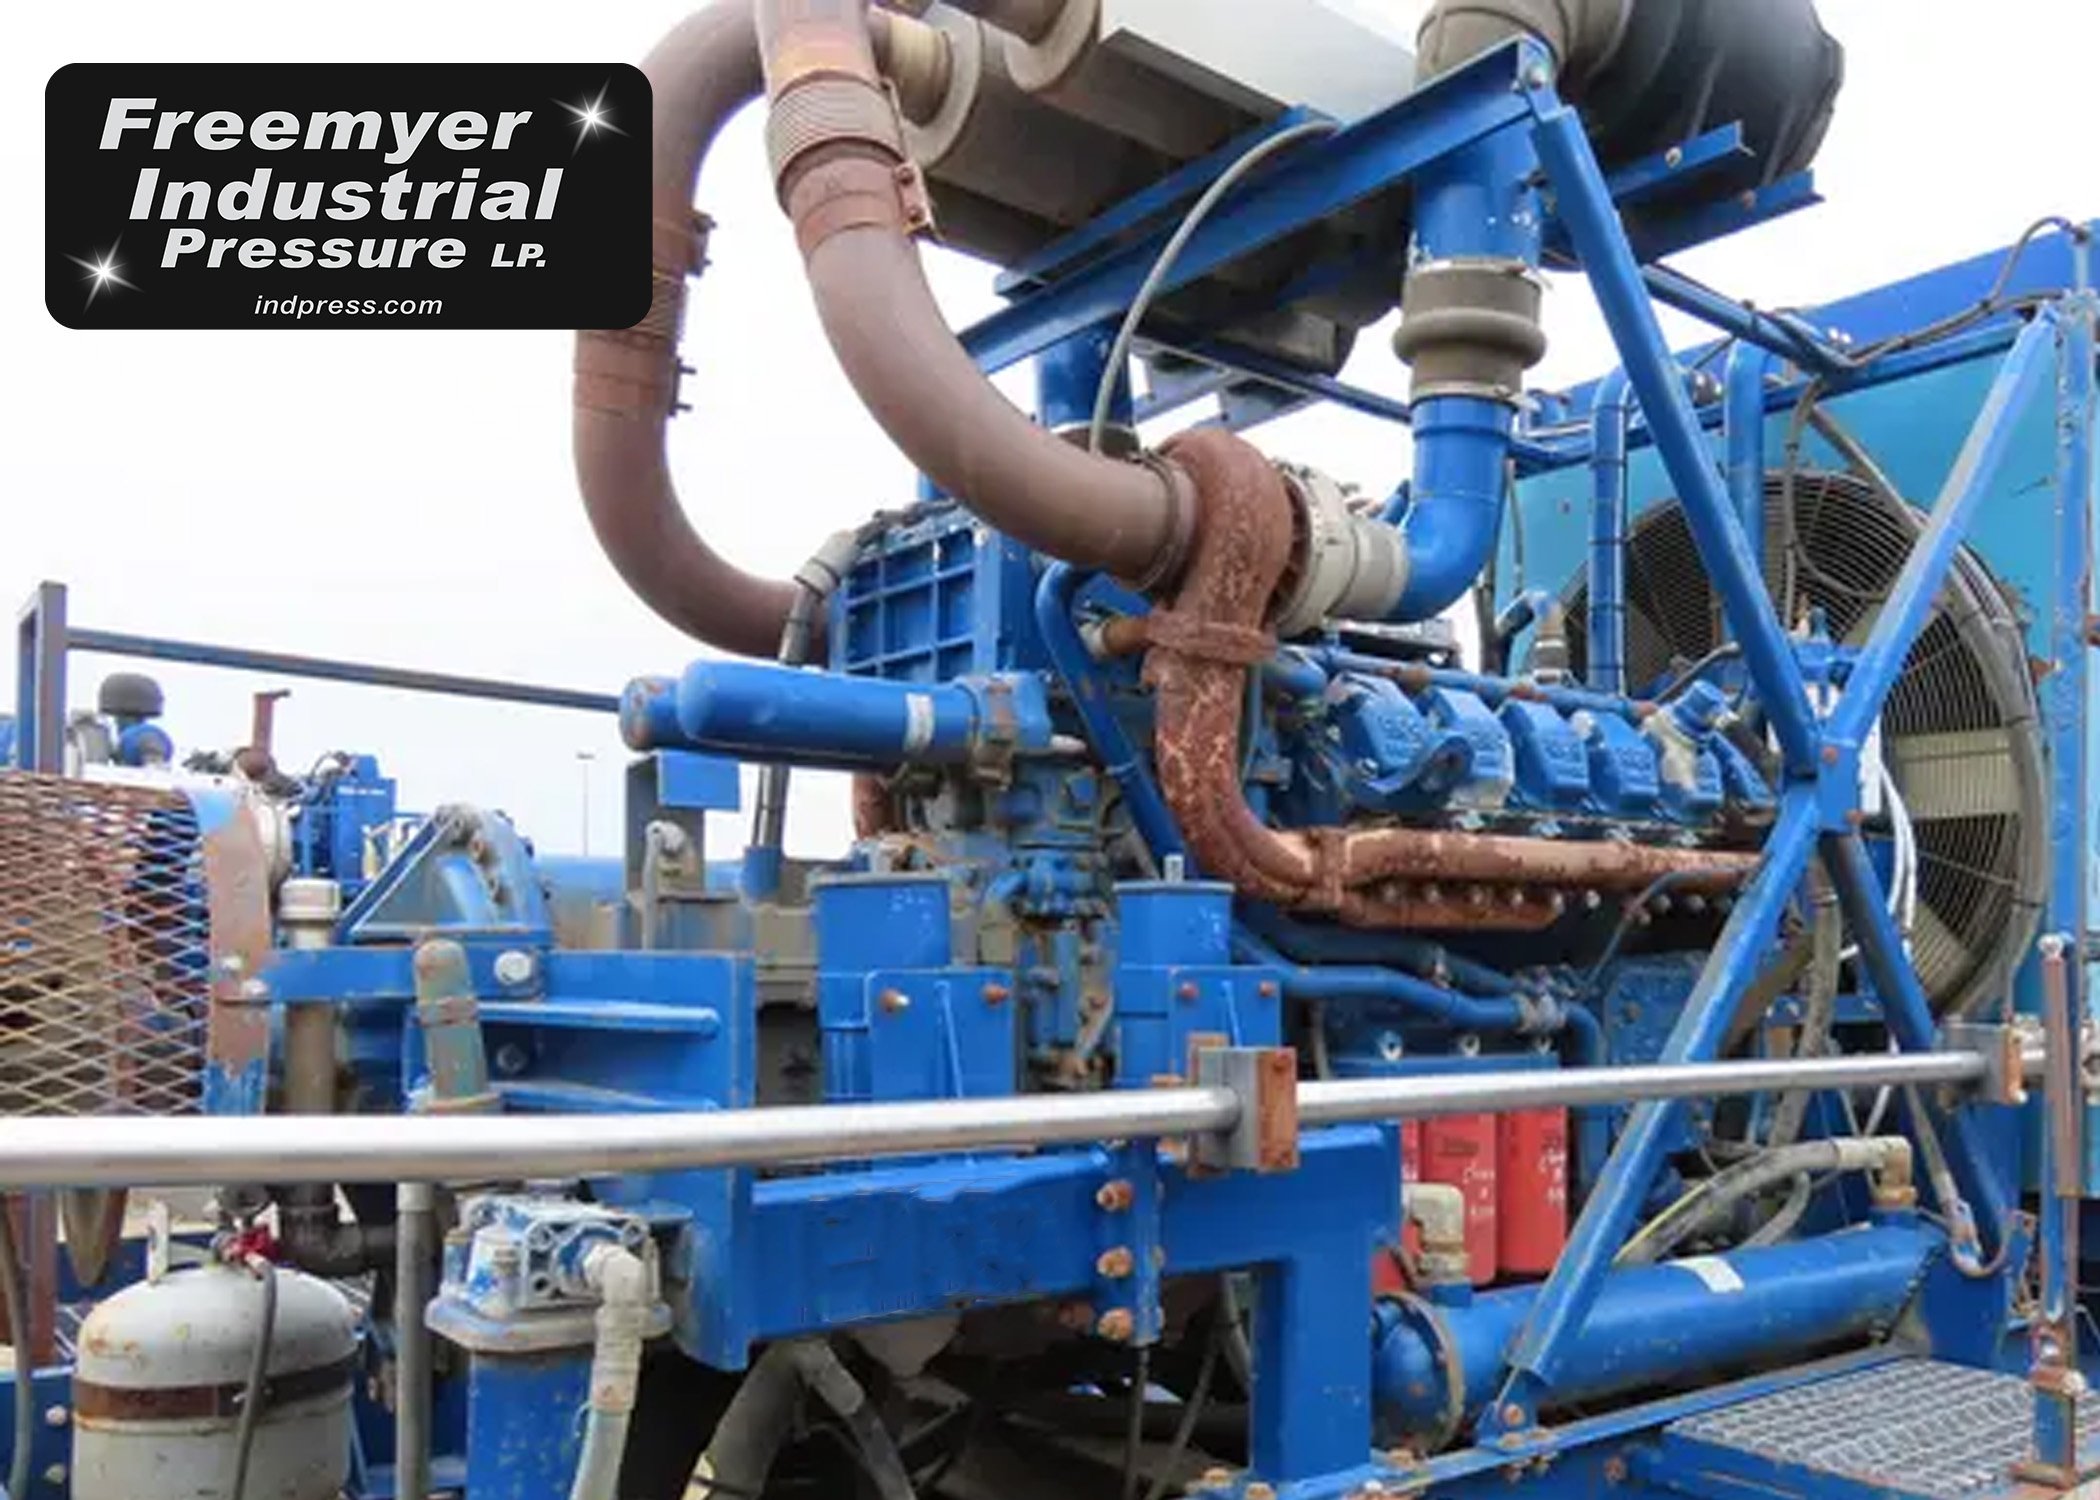 Double Cement Pumps for Sale  Freemyer Industrial Pressure